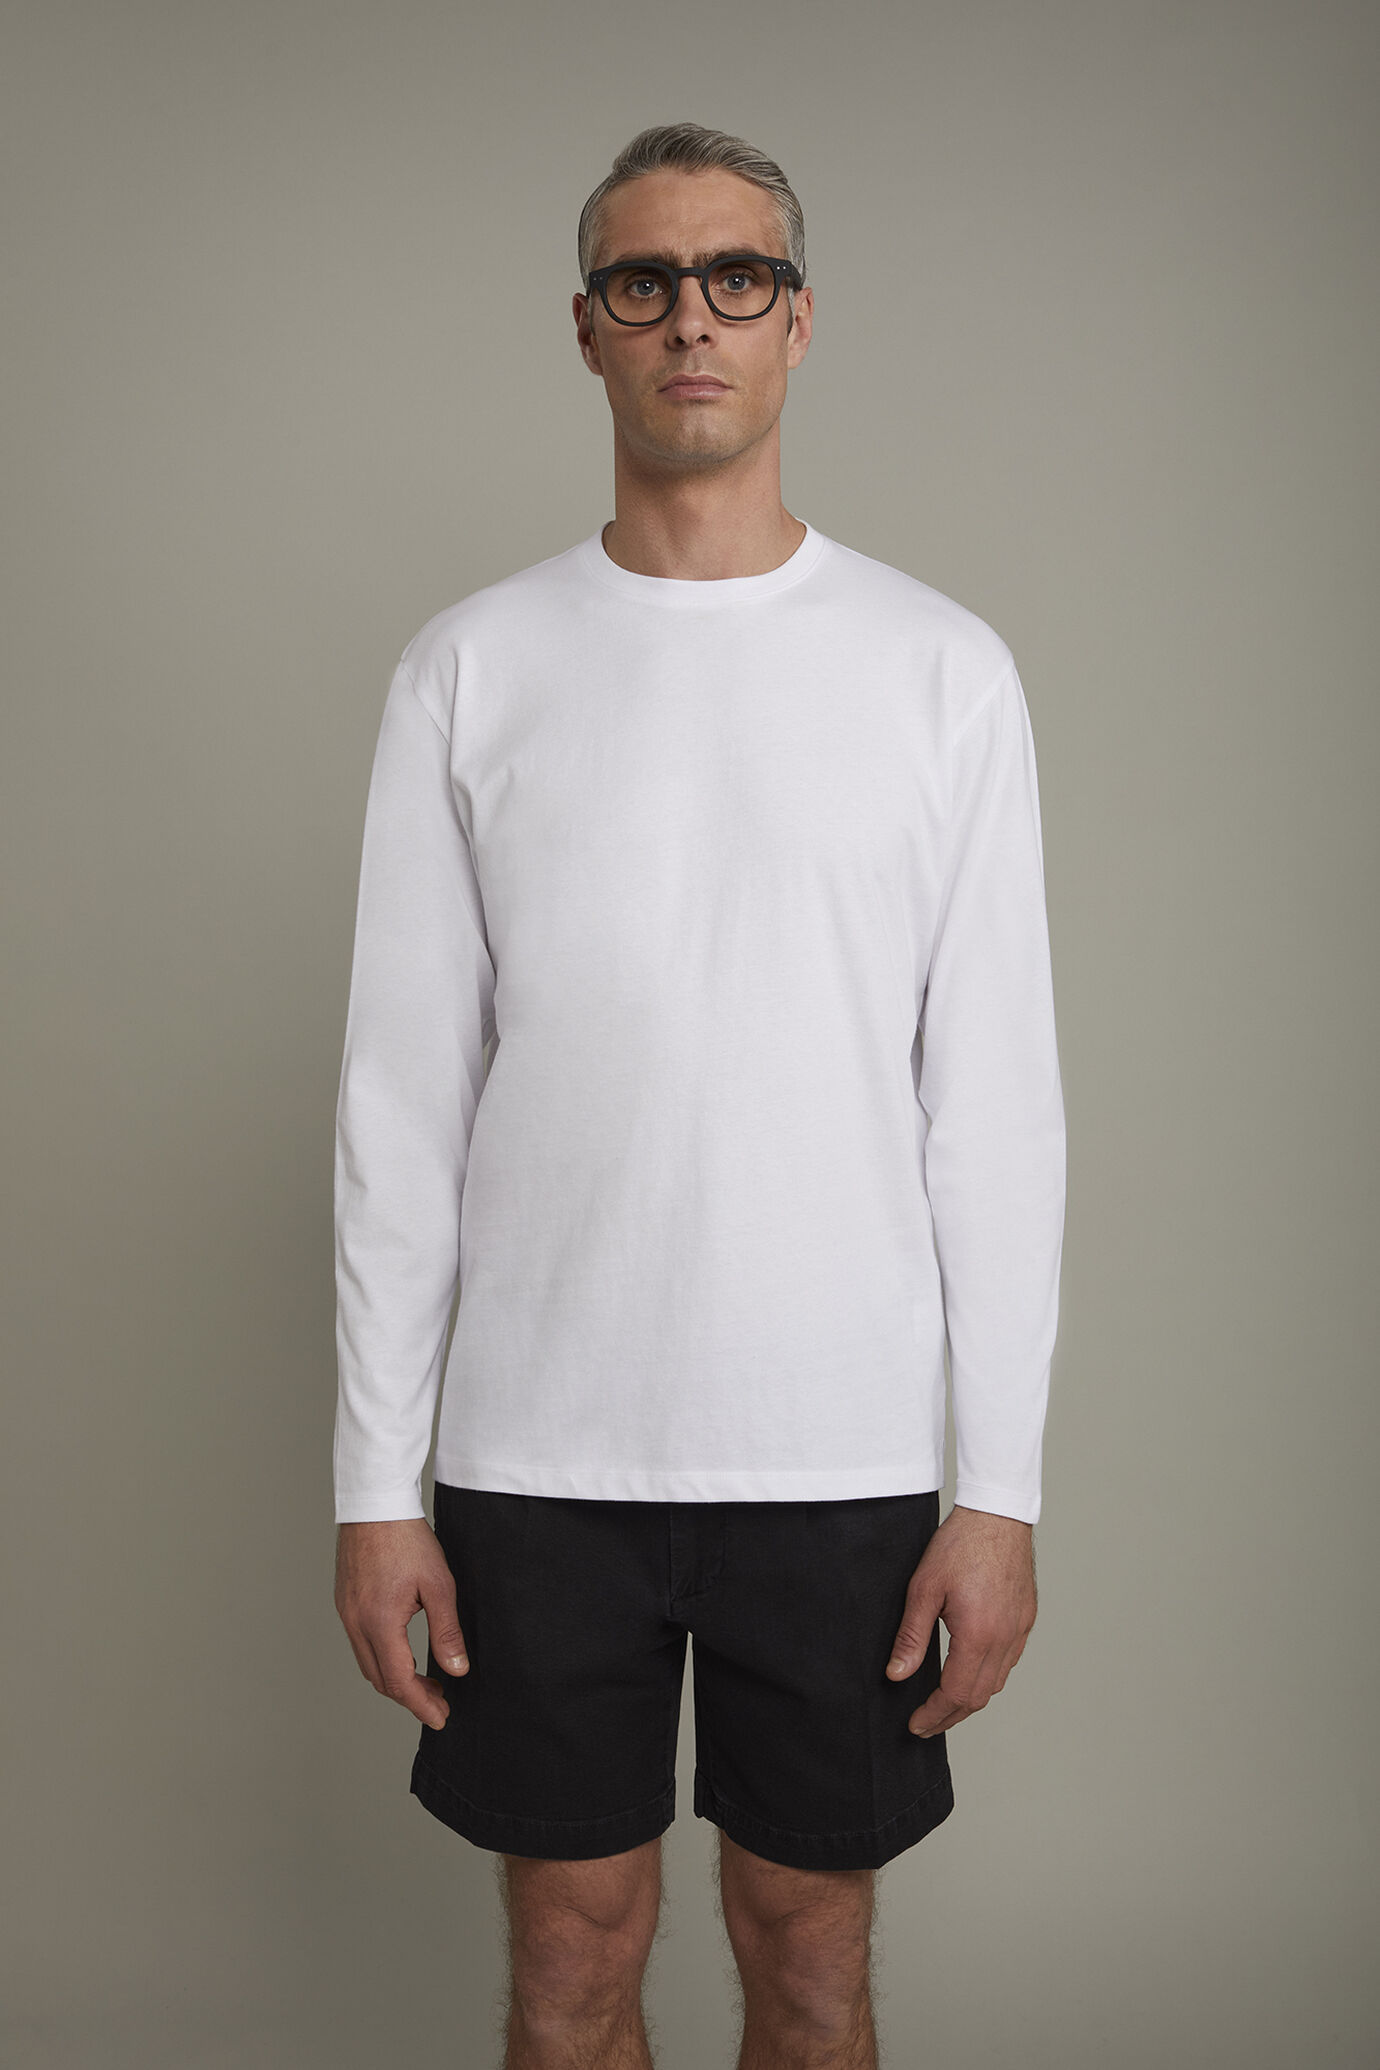 Men’s round neck t-shirt with long sleeves 100% cotton regular fit image number 2